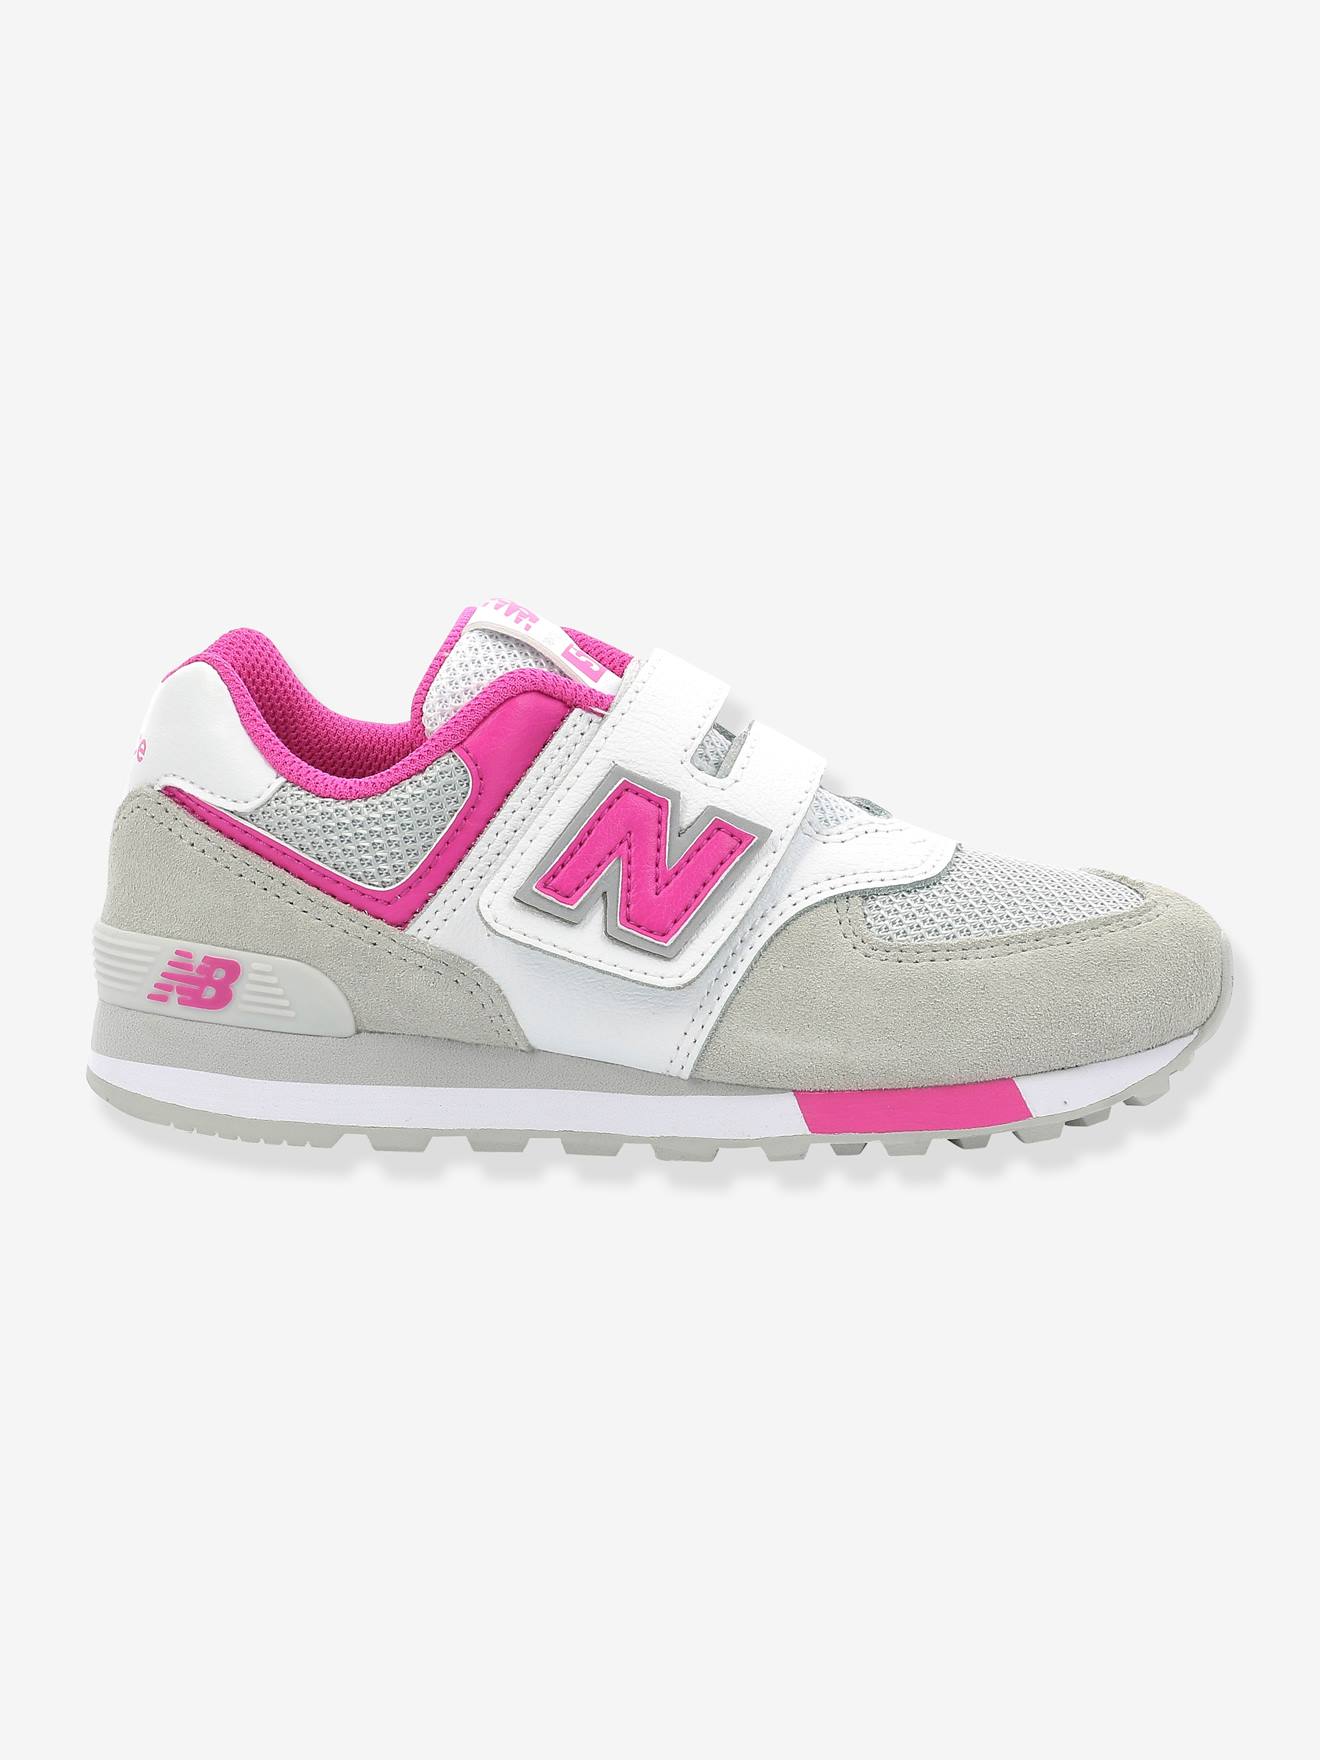 new balance fille 31 Cheaper Than Retail Price> Buy Clothing ...